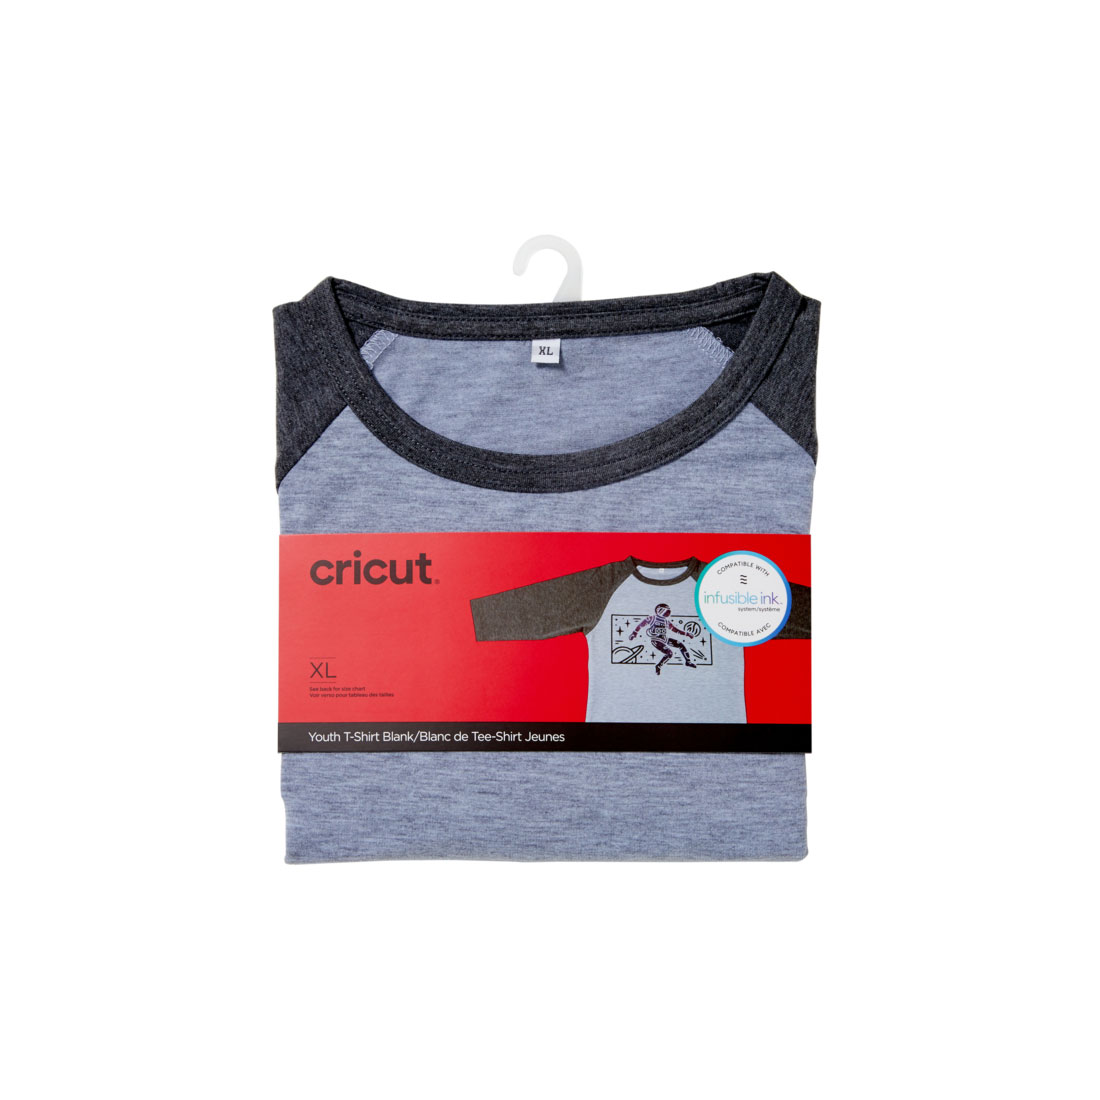 Cricut White Infusible Ink Men's Crew Neck T Shirt Blank